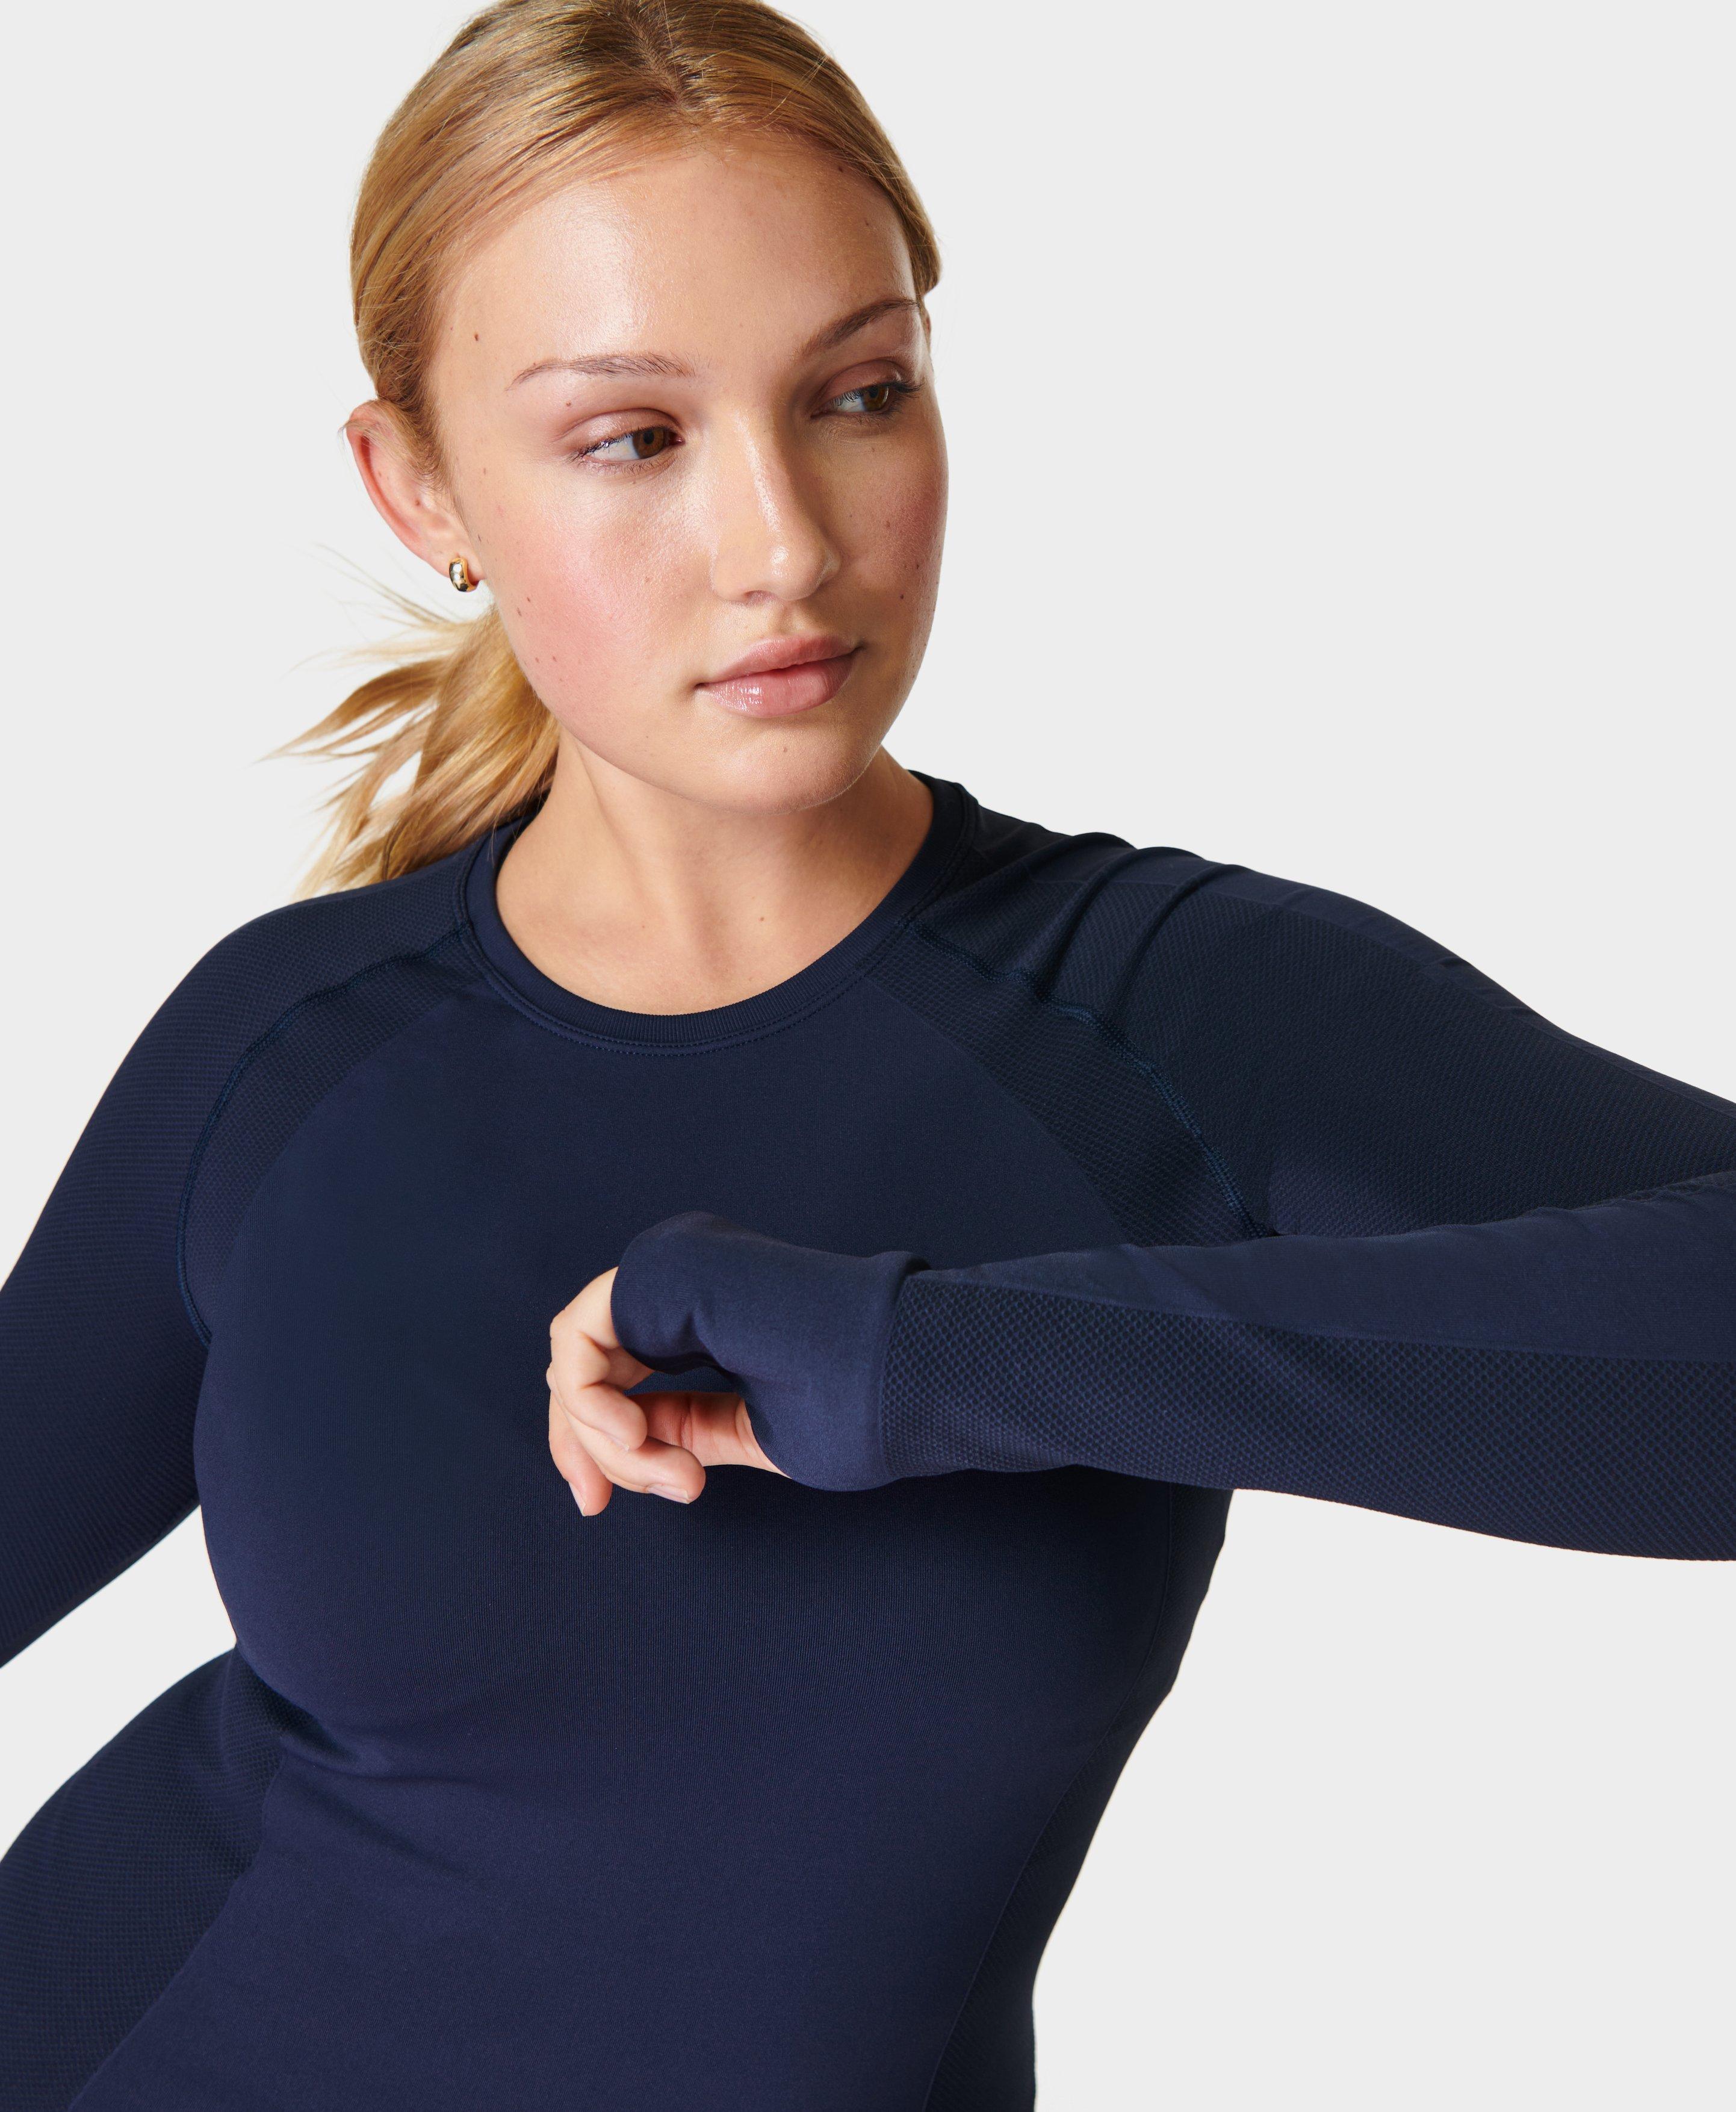 Long Sleeve Gym Tops Women with Thumb Hole(Neon Pink,XS) 